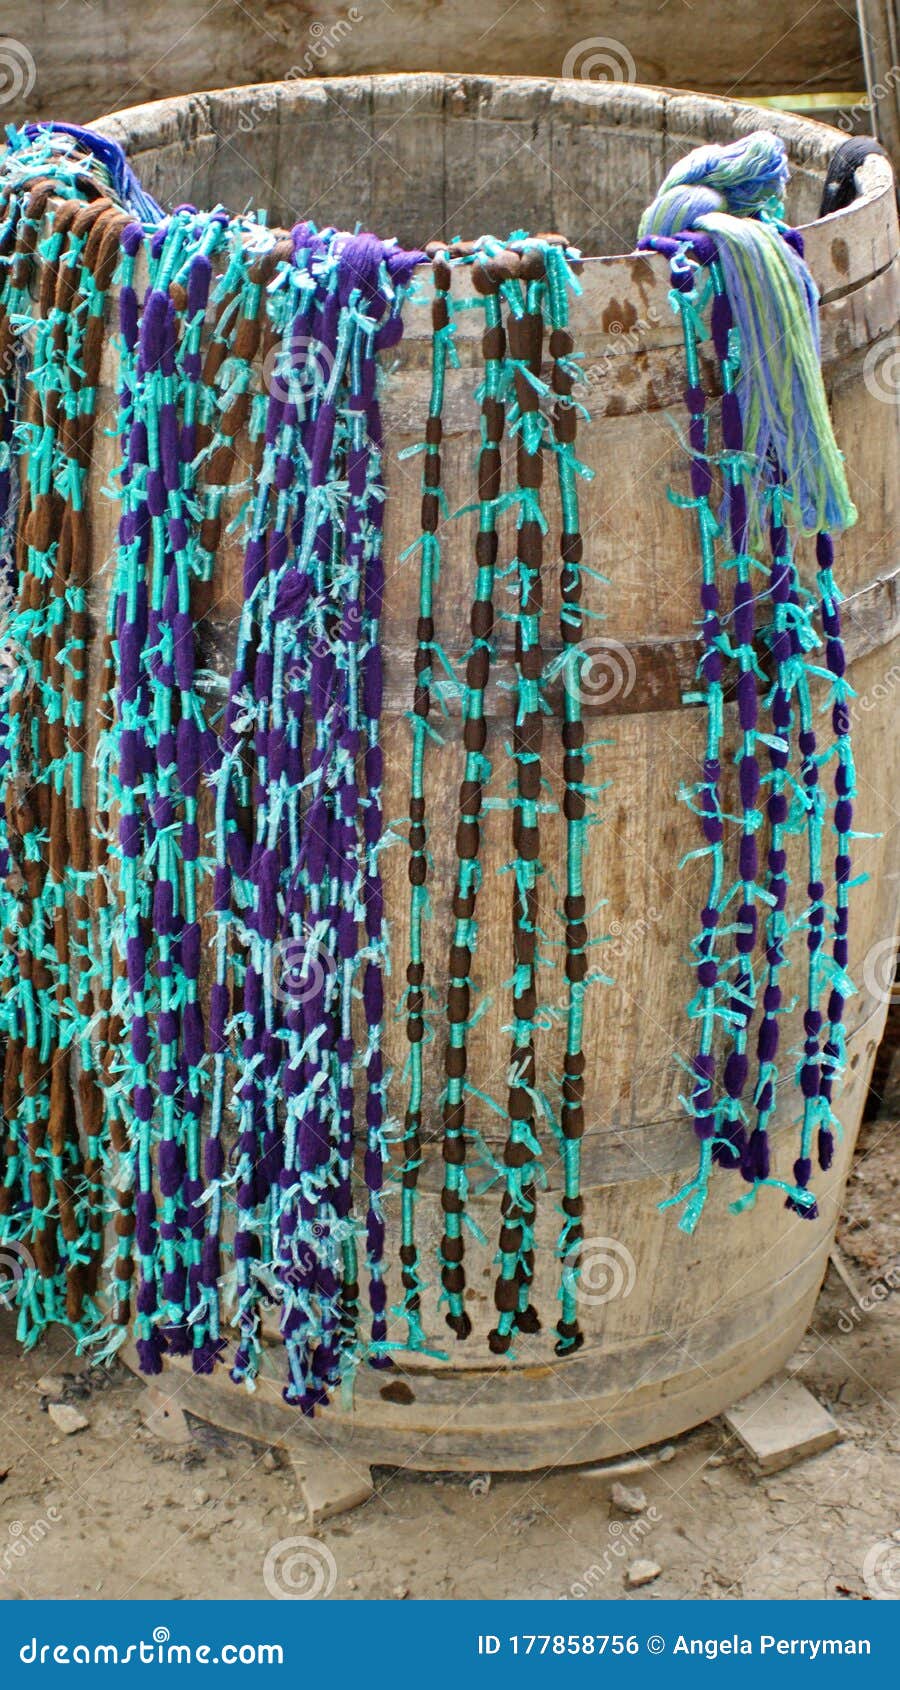 dyed ikat thread hanging to dry